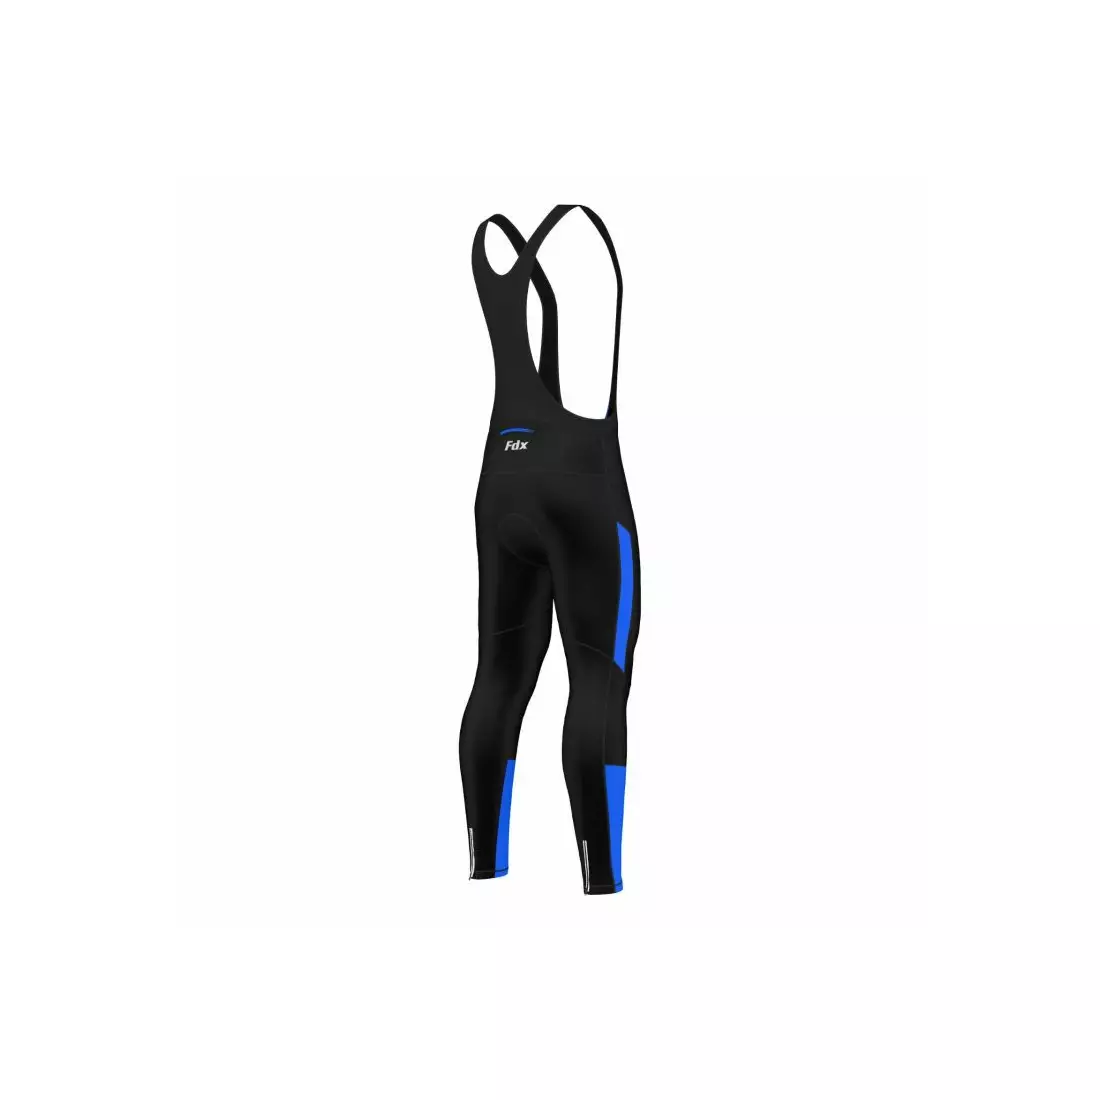 FDX 1220 insulated cycling pants for a bicycle, black and blue